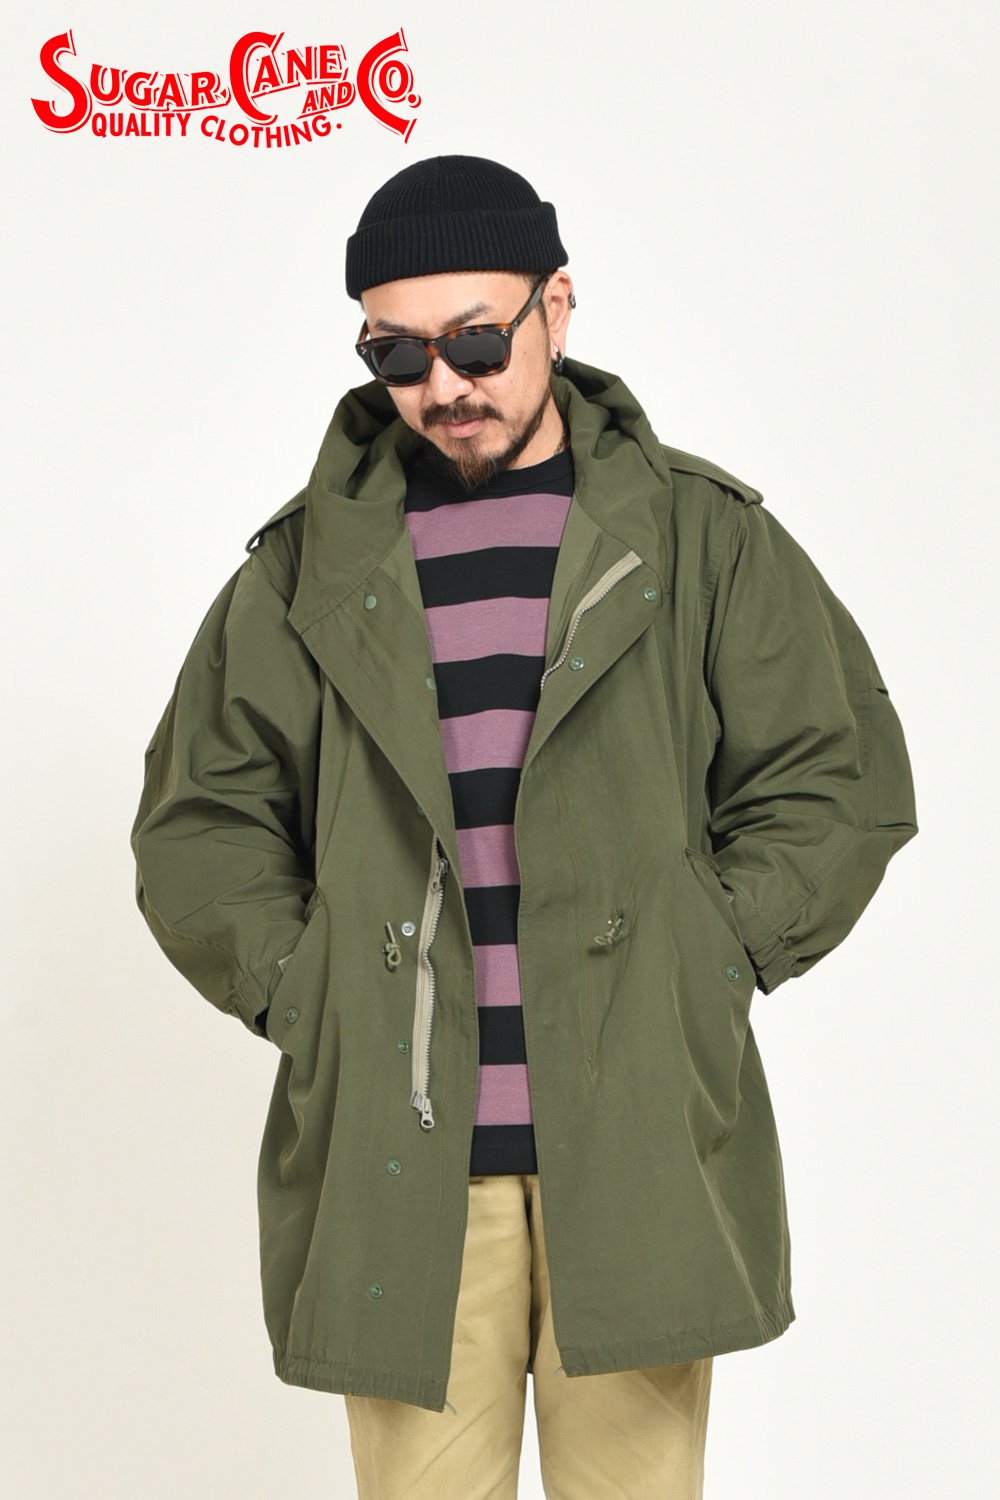 SUGAR CANE(シュガーケーン) モッズパーカー T/C WEATHER CLOTH WATER REPERENT PARKA SC14620  通販正規取扱 | ハーレムストア公式通販サイト